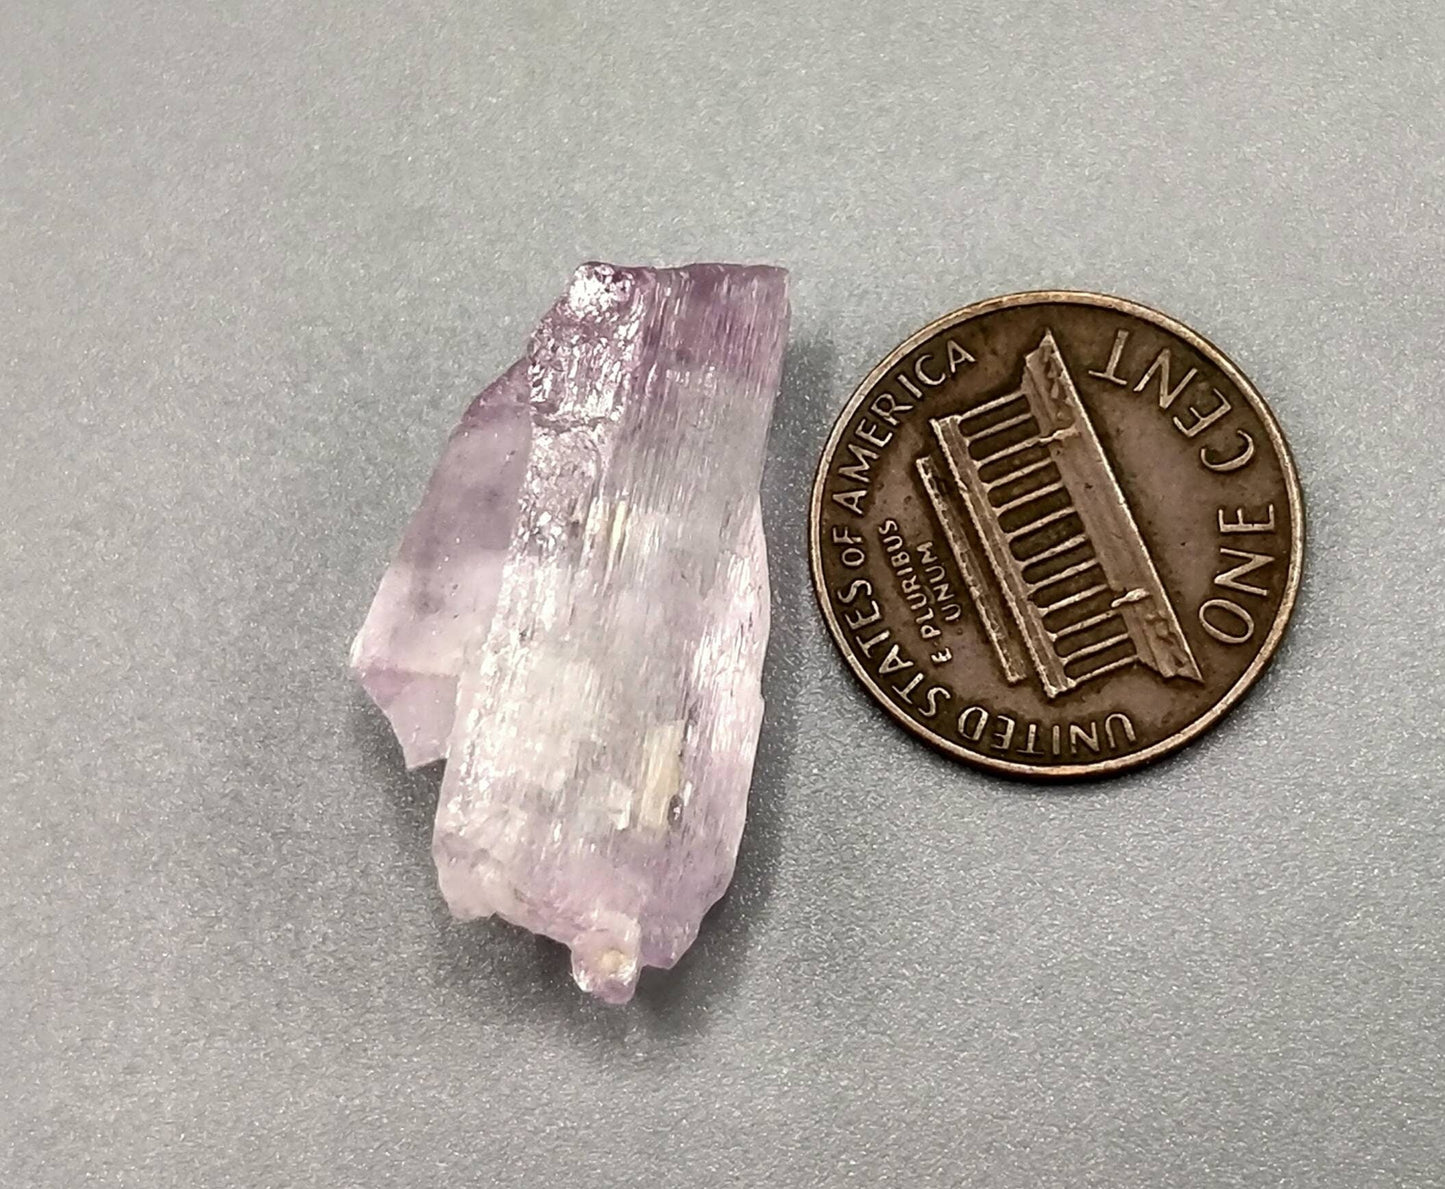 ARSAA GEMS AND MINERALSAn aesthetic 5.9 grams purple color lustrous kunzite crystal from Afghanistan - Premium  from ARSAA GEMS AND MINERALS - Just $6.00! Shop now at ARSAA GEMS AND MINERALS